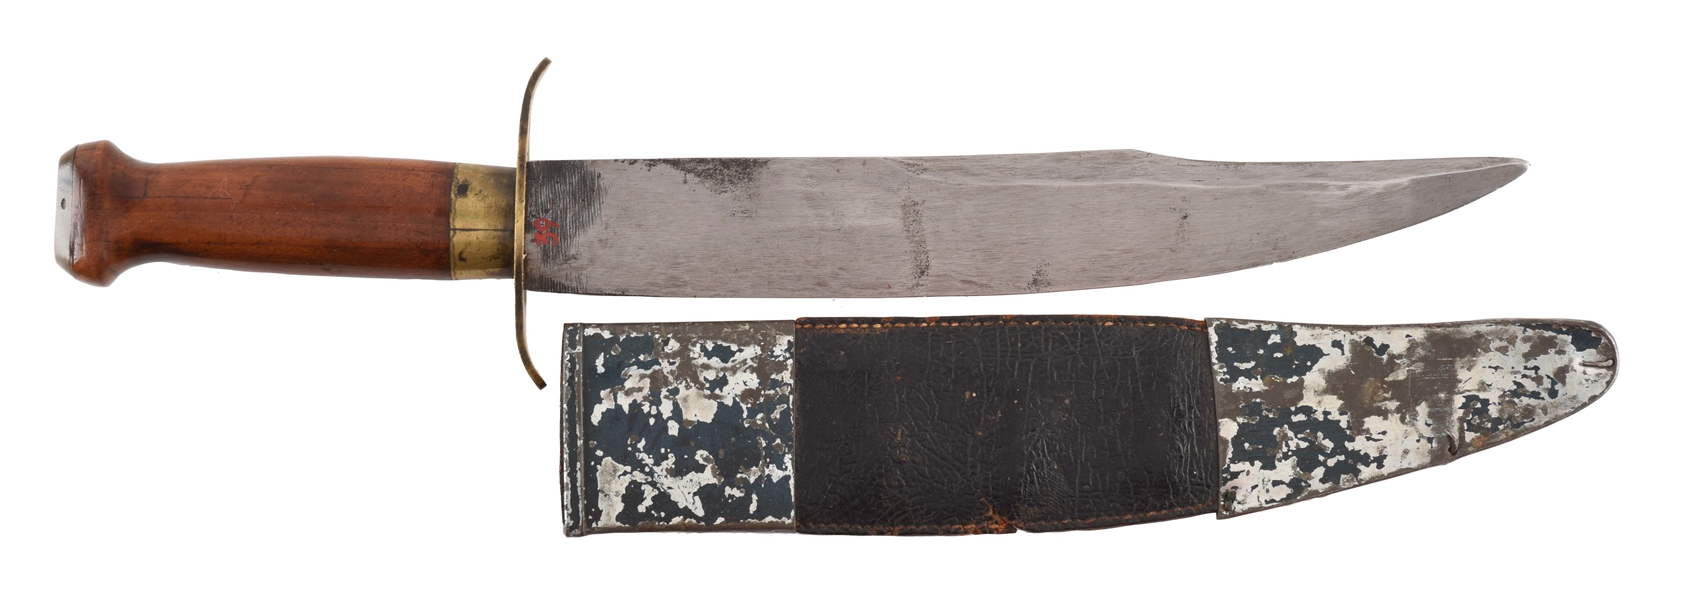 CLASSIC CONFEDERATE BOWIE KNIFE WITH SHEATH.